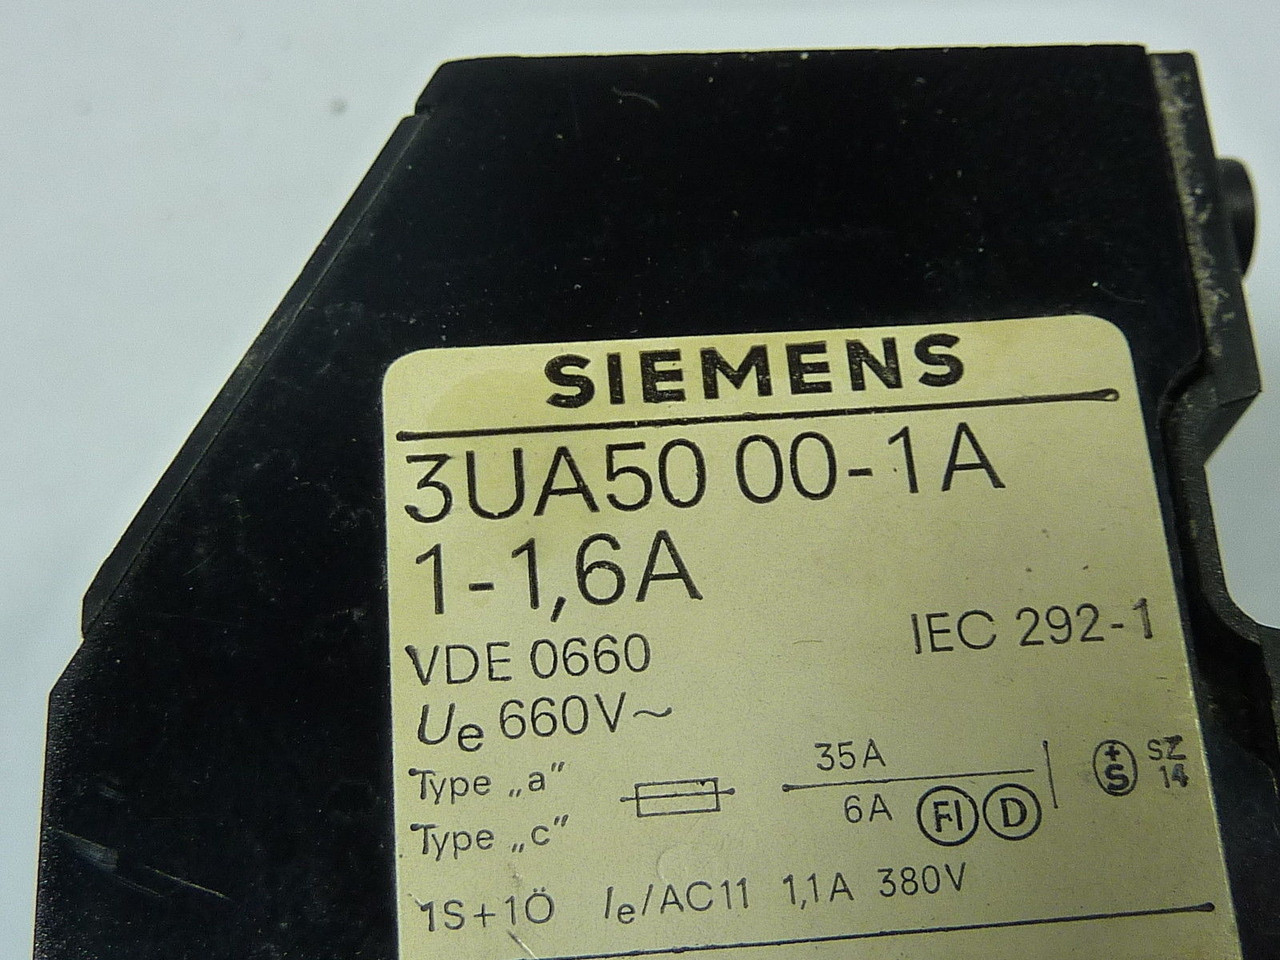 Siemens 3UA50-00-1A Overload Relay 1-1.6A *Cosmetic Damage* USED